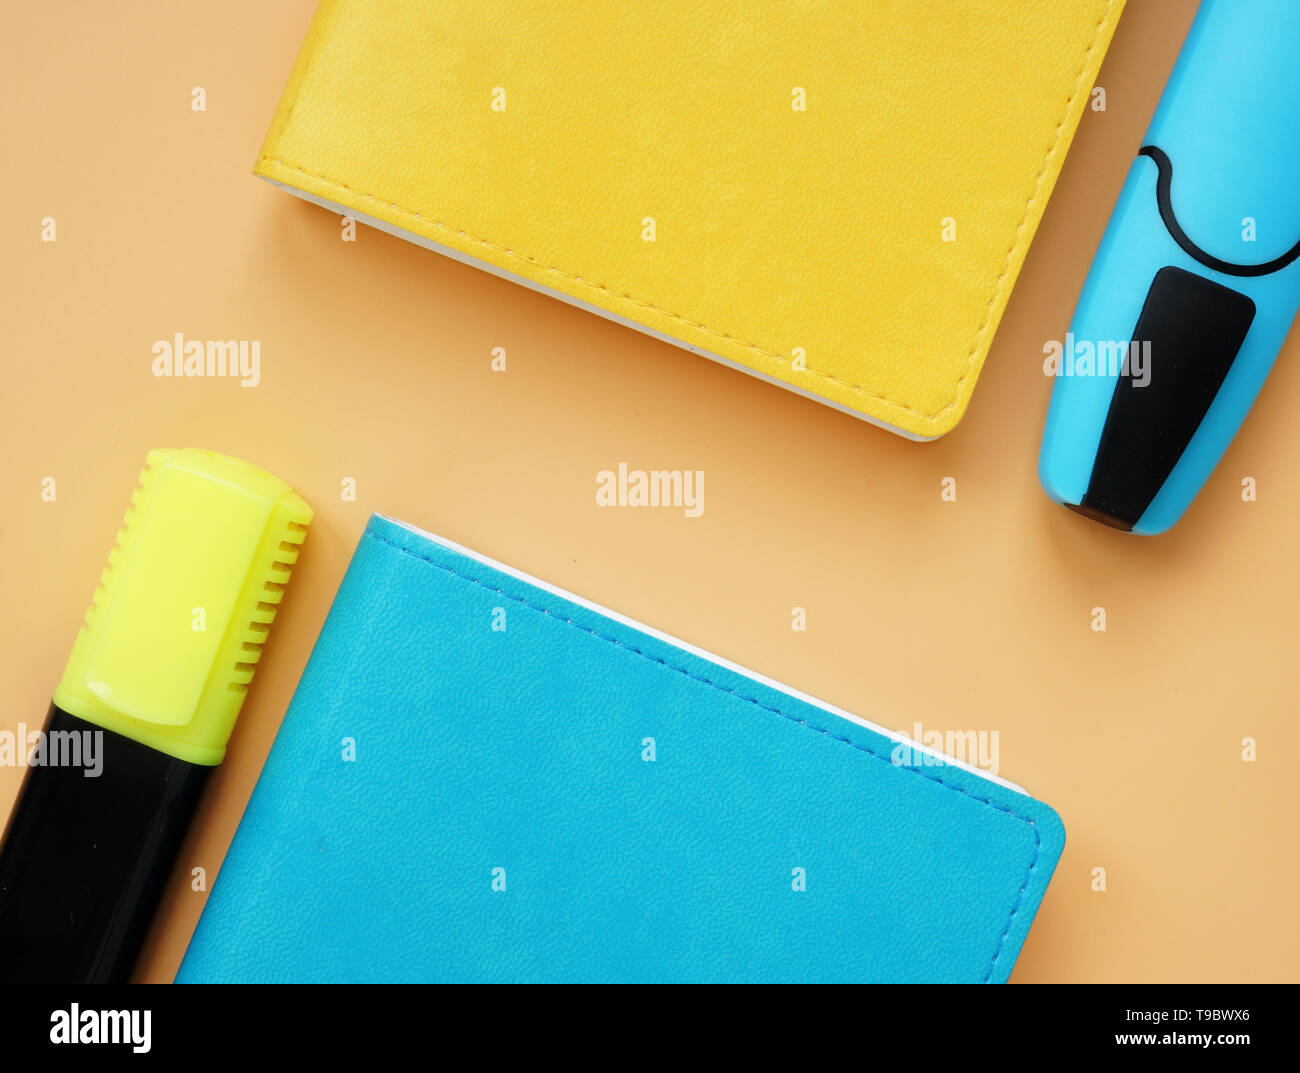 Top view of blue and yellow notepads and markers on an orange desk. Colorful office supply. Stock Photo